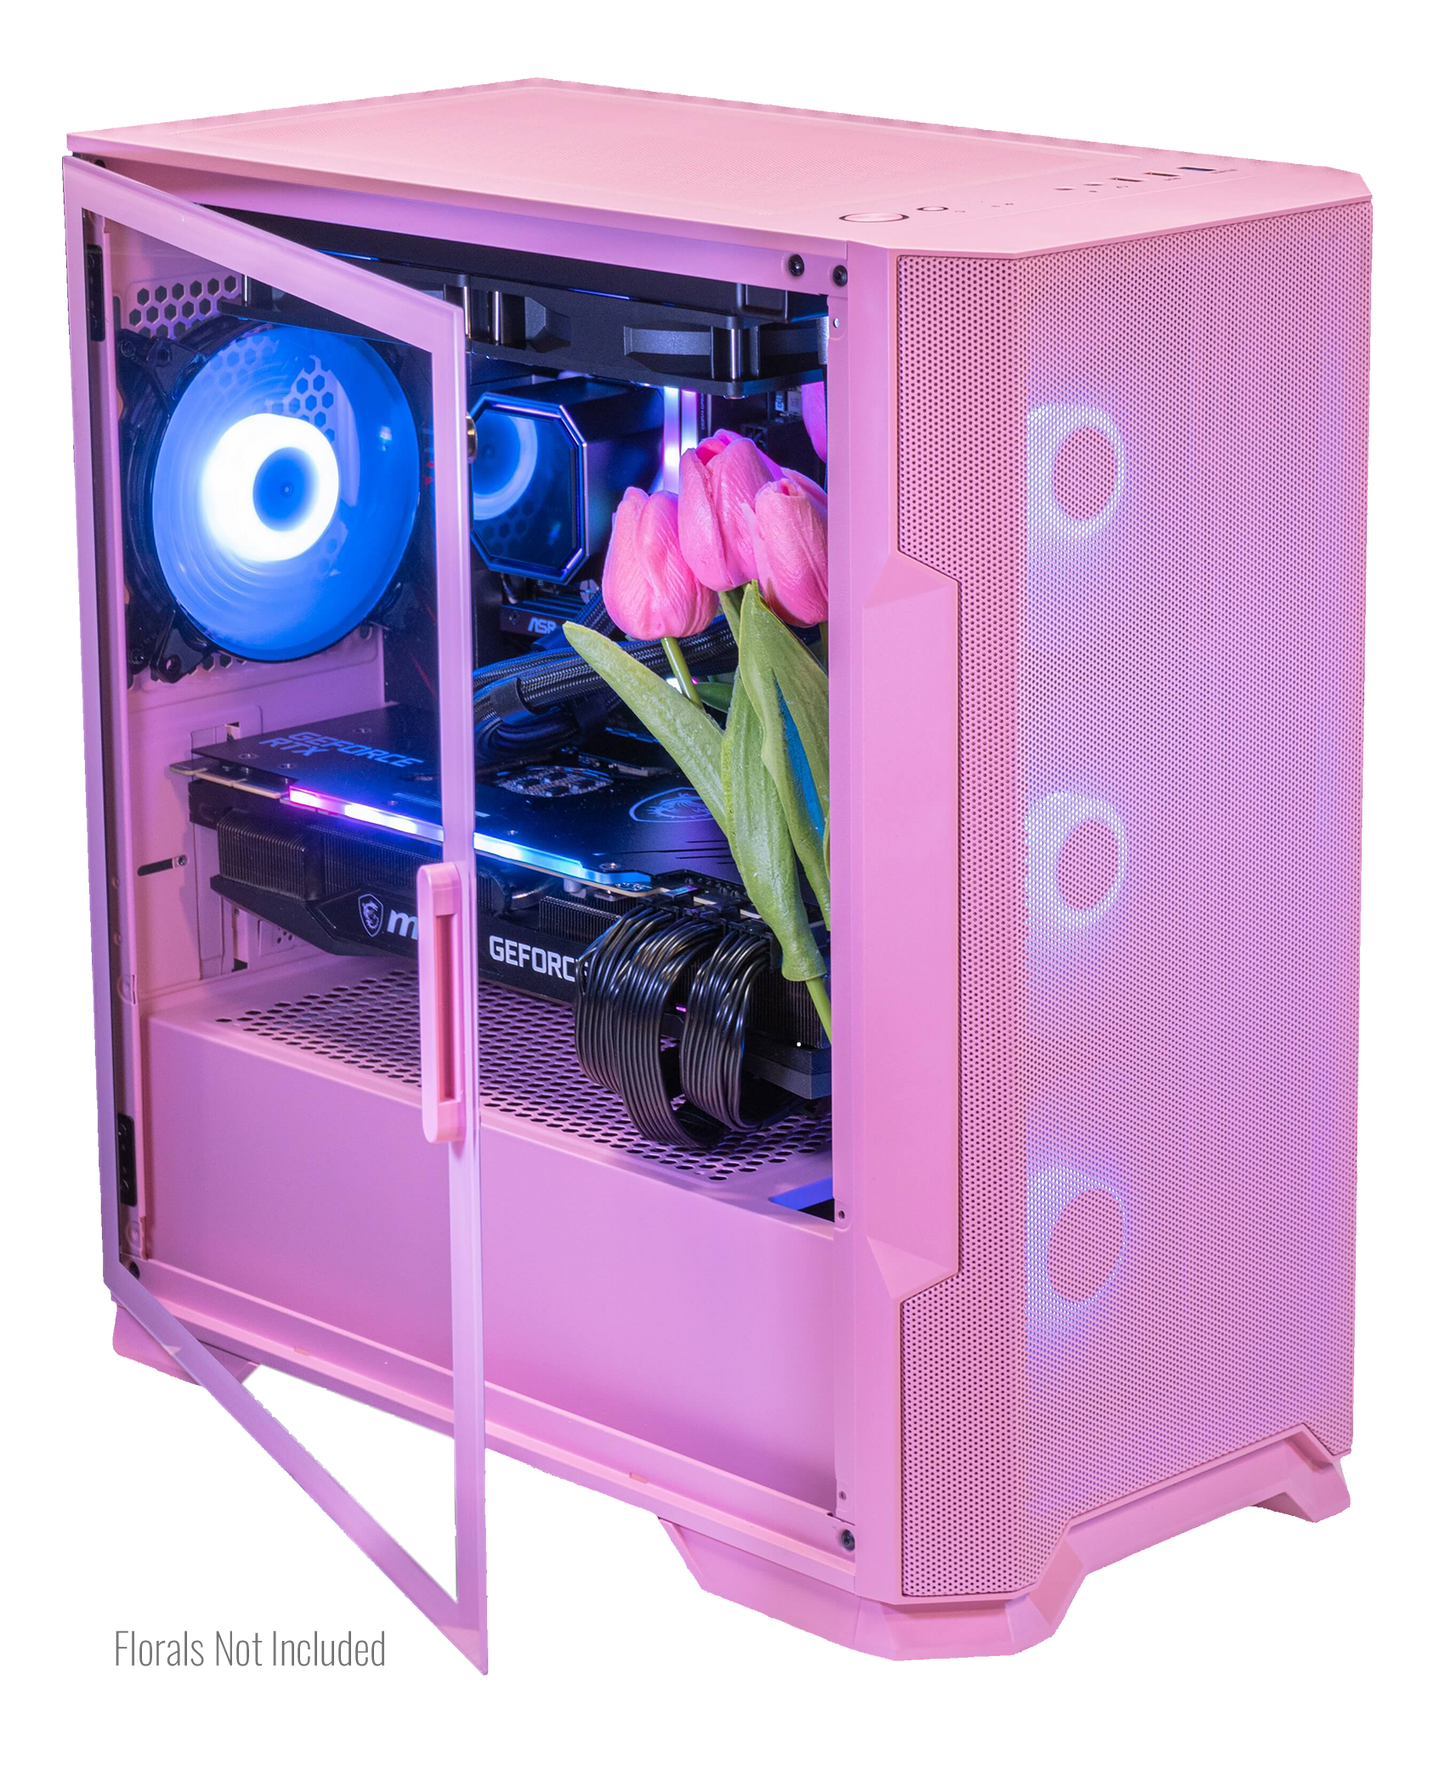 Vetroo M03 - Build Your Own - AMD - Pink